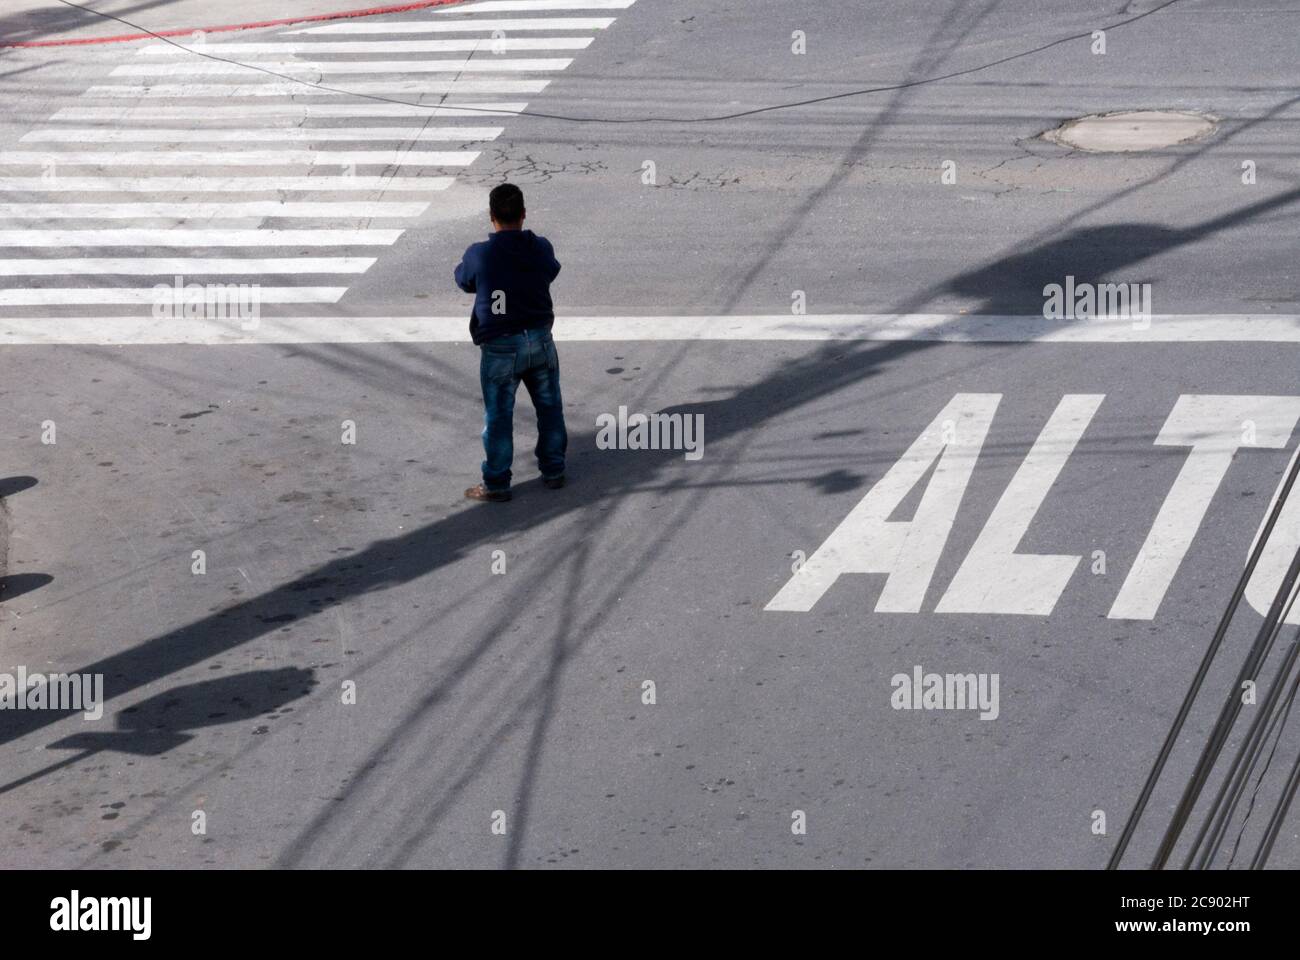 Caregiver of cars in Latin American street, stop sign painted on the asphalt in urban area. Stock Photo